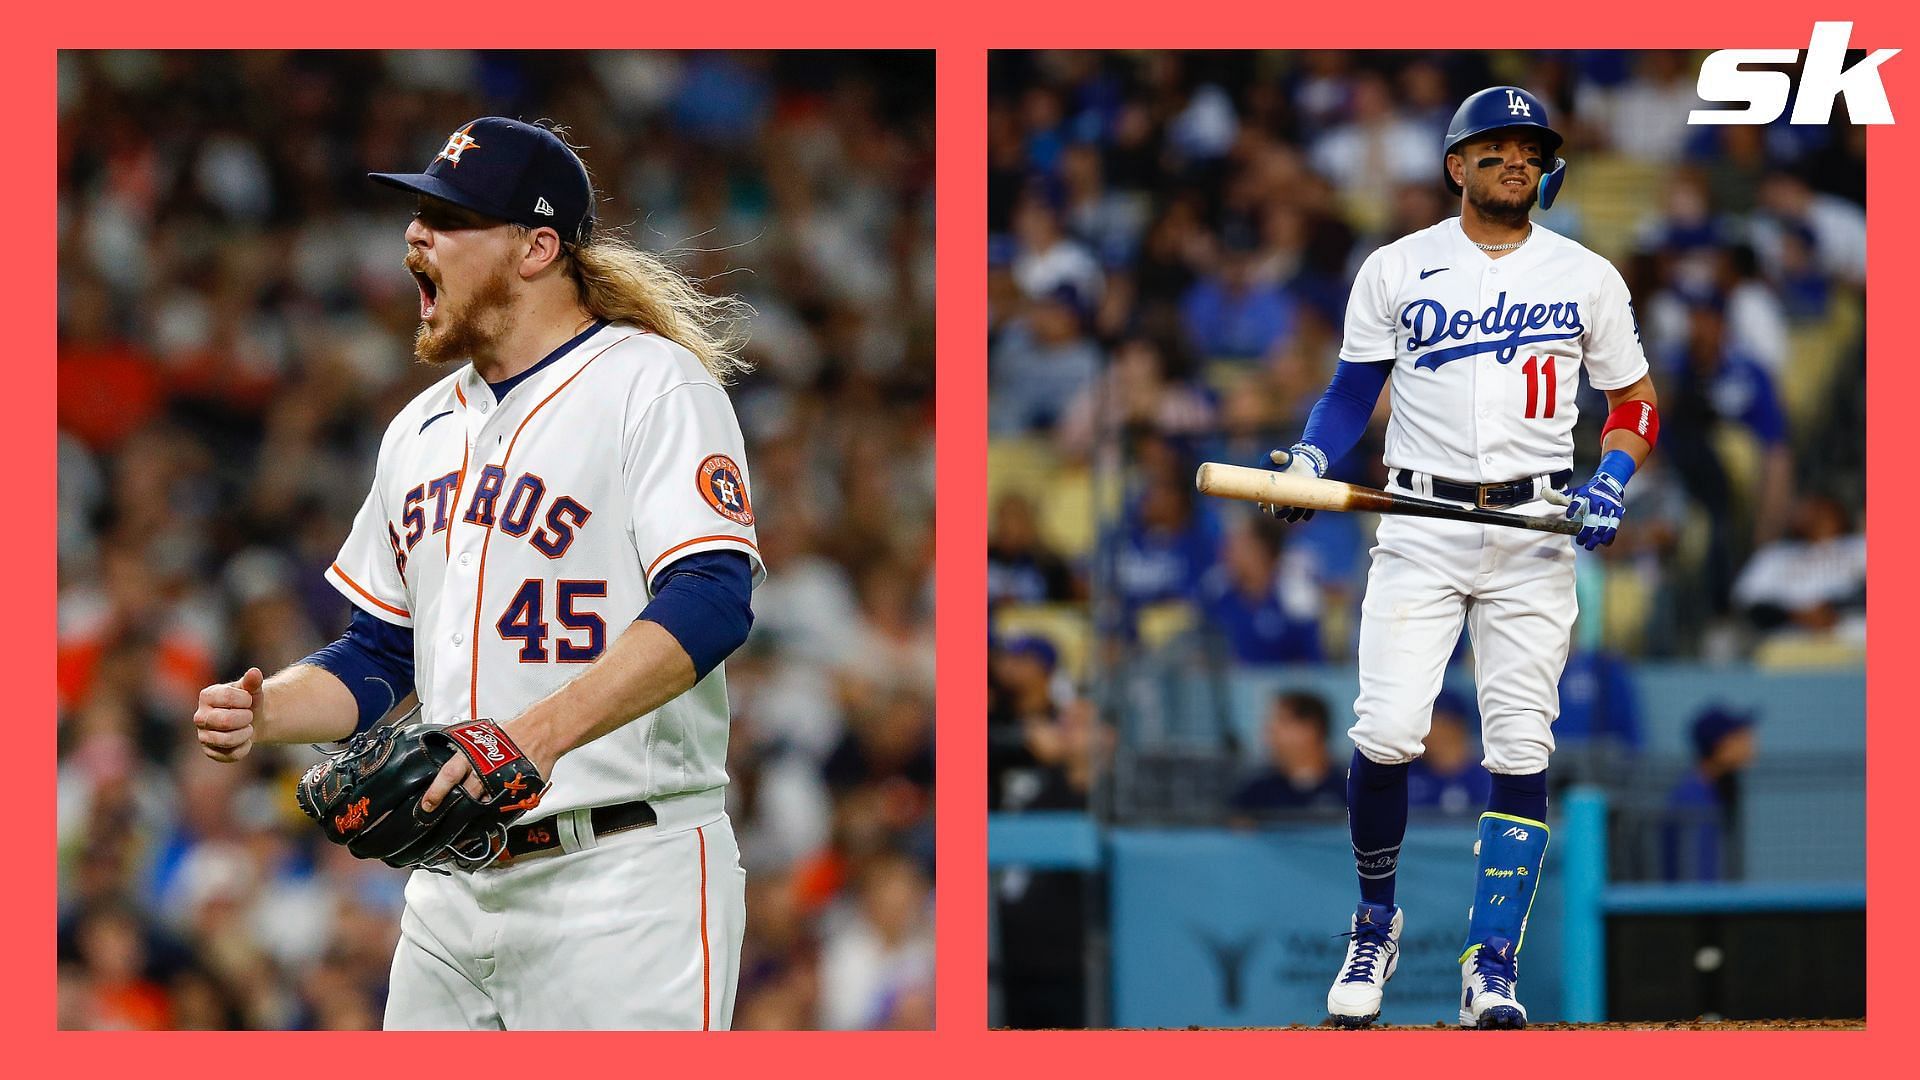 Astros – Dodgers: Ryan Stanek balk call leads to anger on umpire